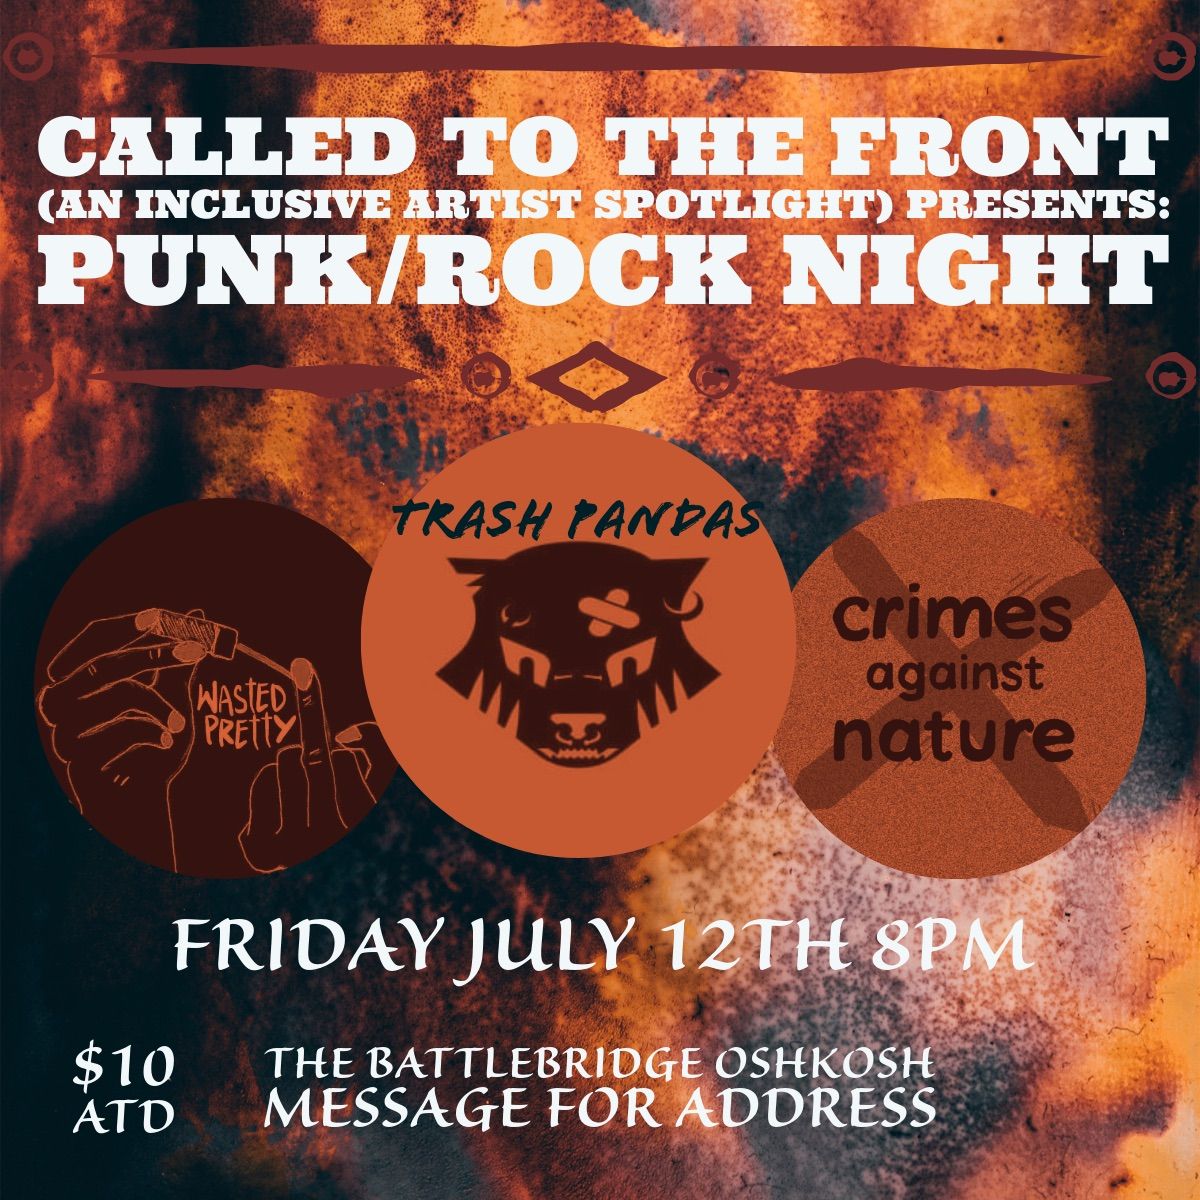 Called to the Front: Wasted Pretty, crimesxnature & Trash Pandas